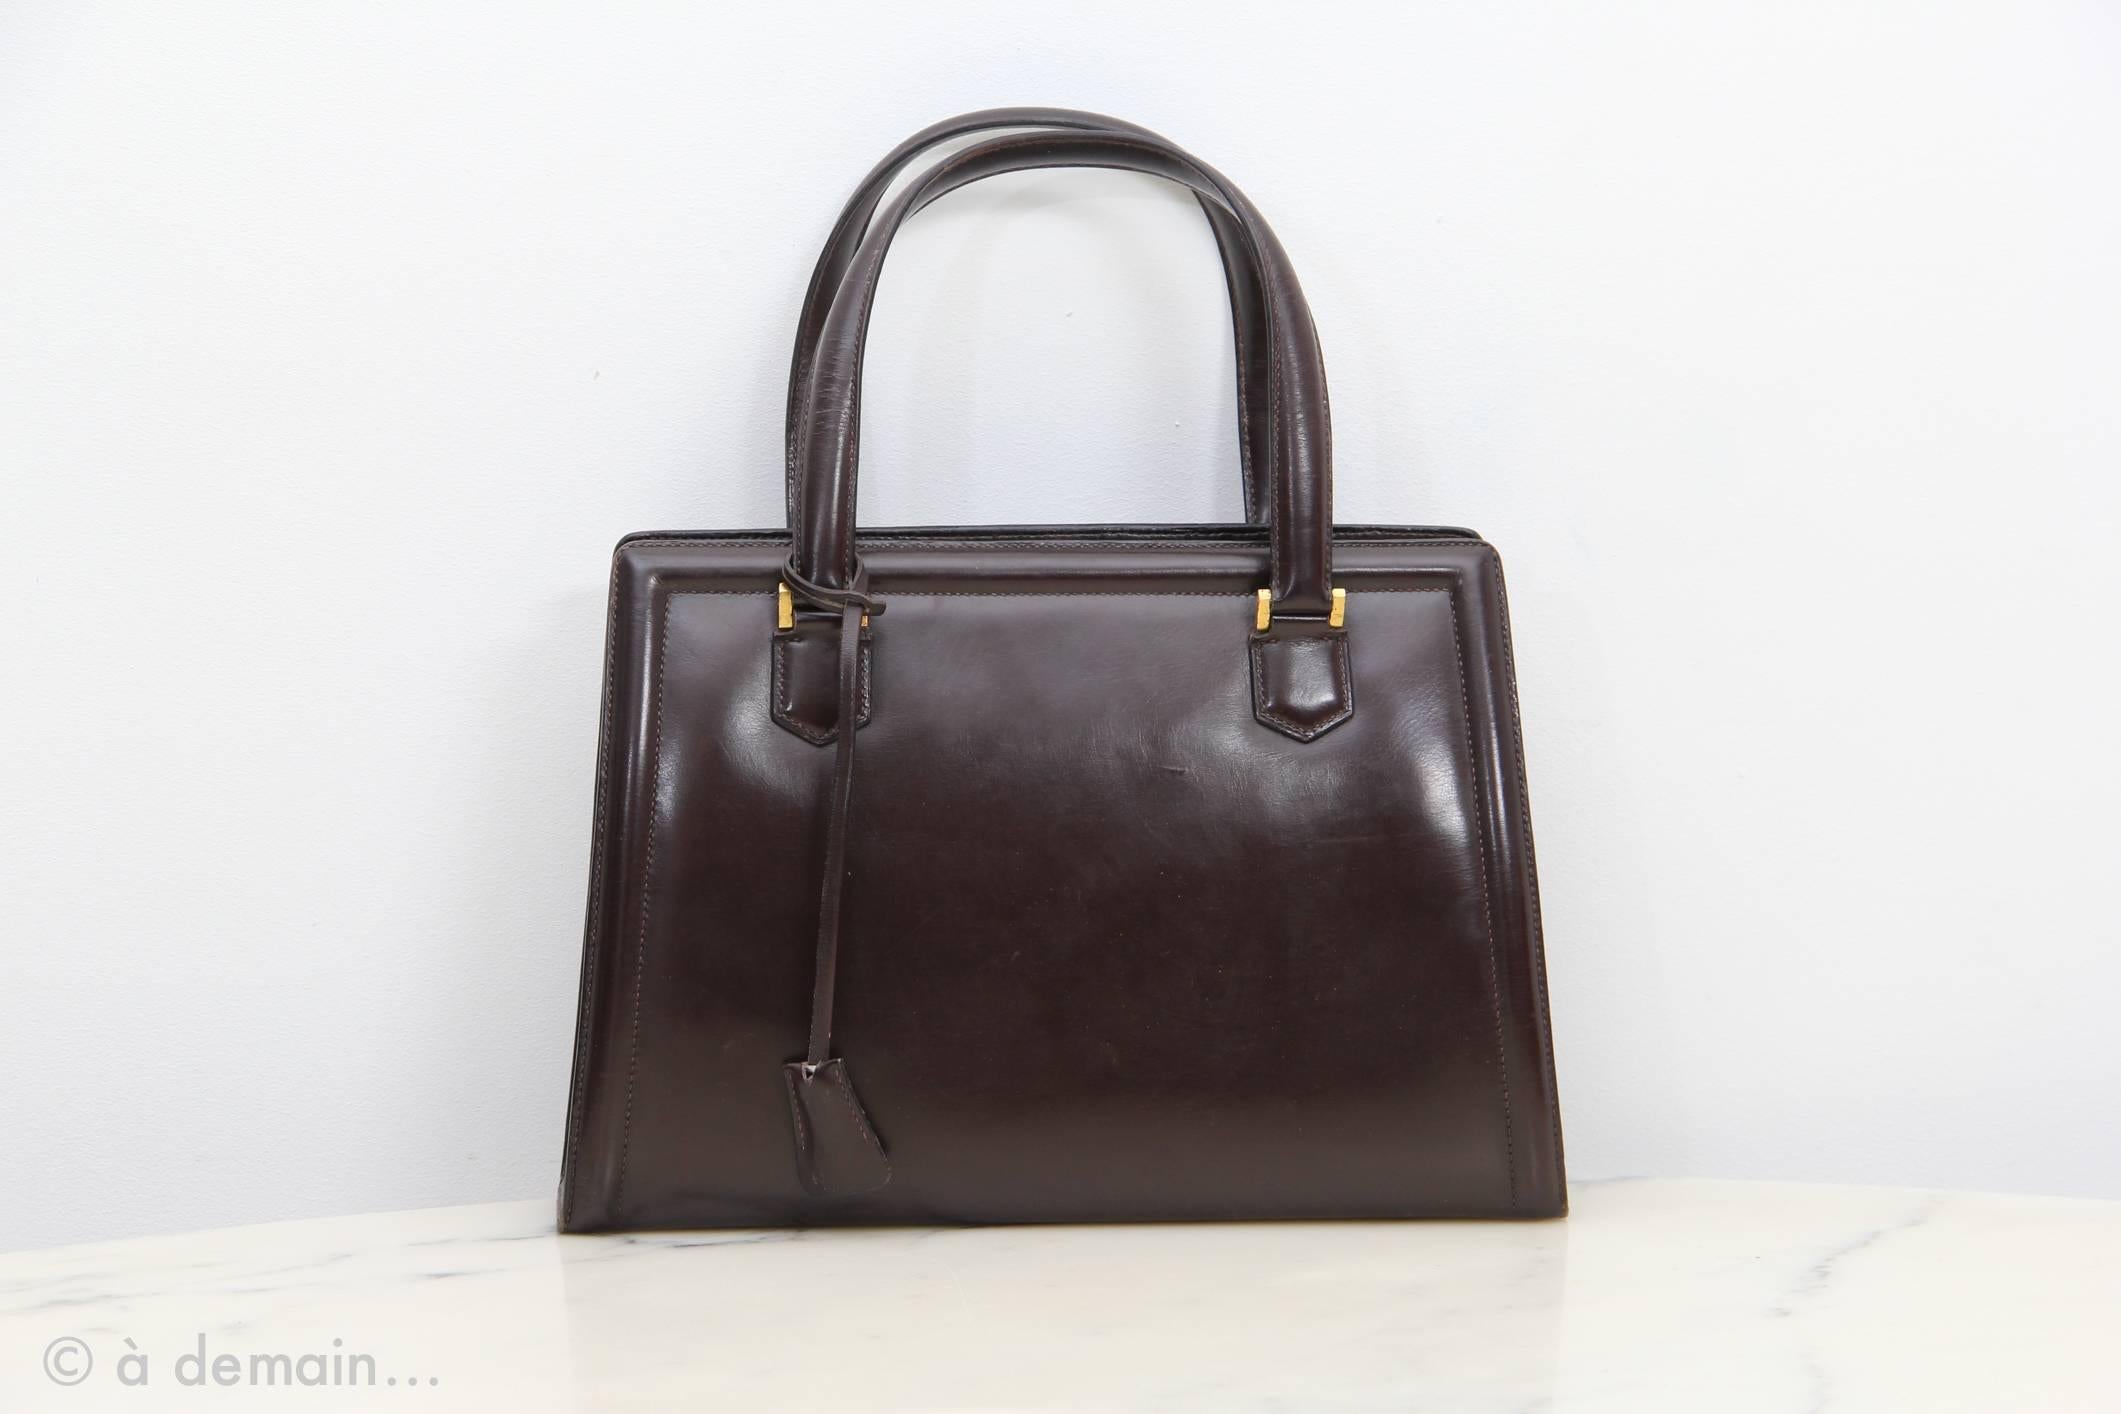 Brown leather vintage bag by Hermès Paris with gold plated hardware.
Three pockets and the middle one has a lock. Key available. 

Good condition with some leather wears of use. 
Height without handles: 21 cm
Height with: 33 cm
W: 29,5 cm
D: